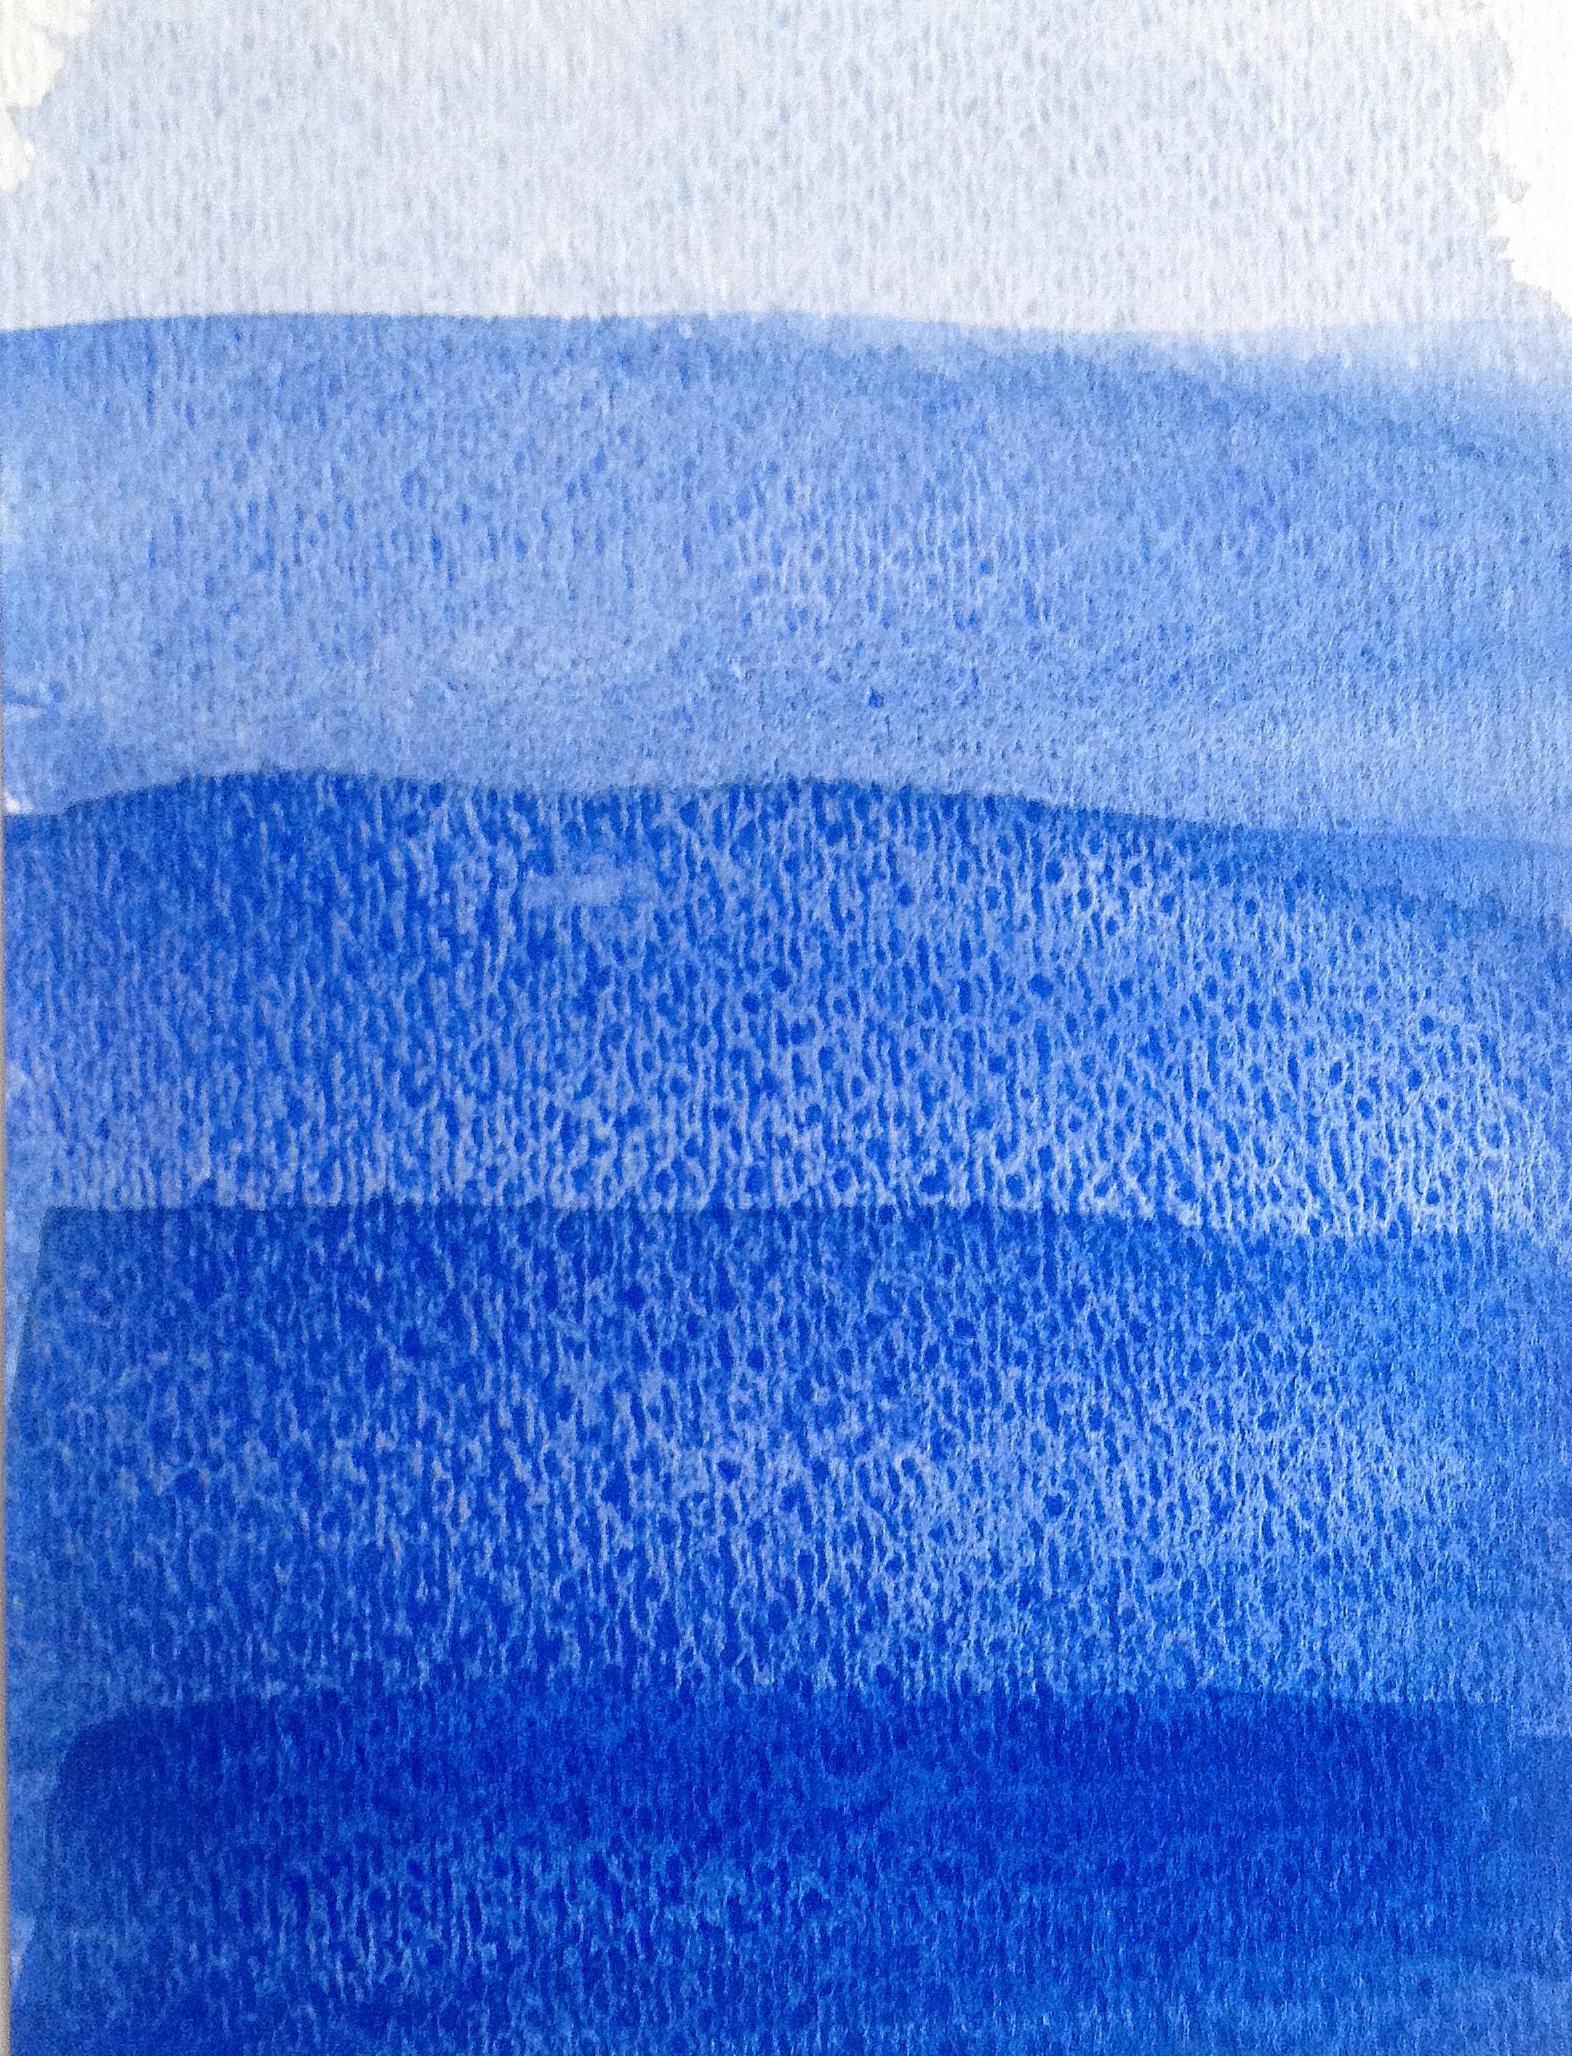 Watercolor Techniques: Overlaying Washes (Glazing)